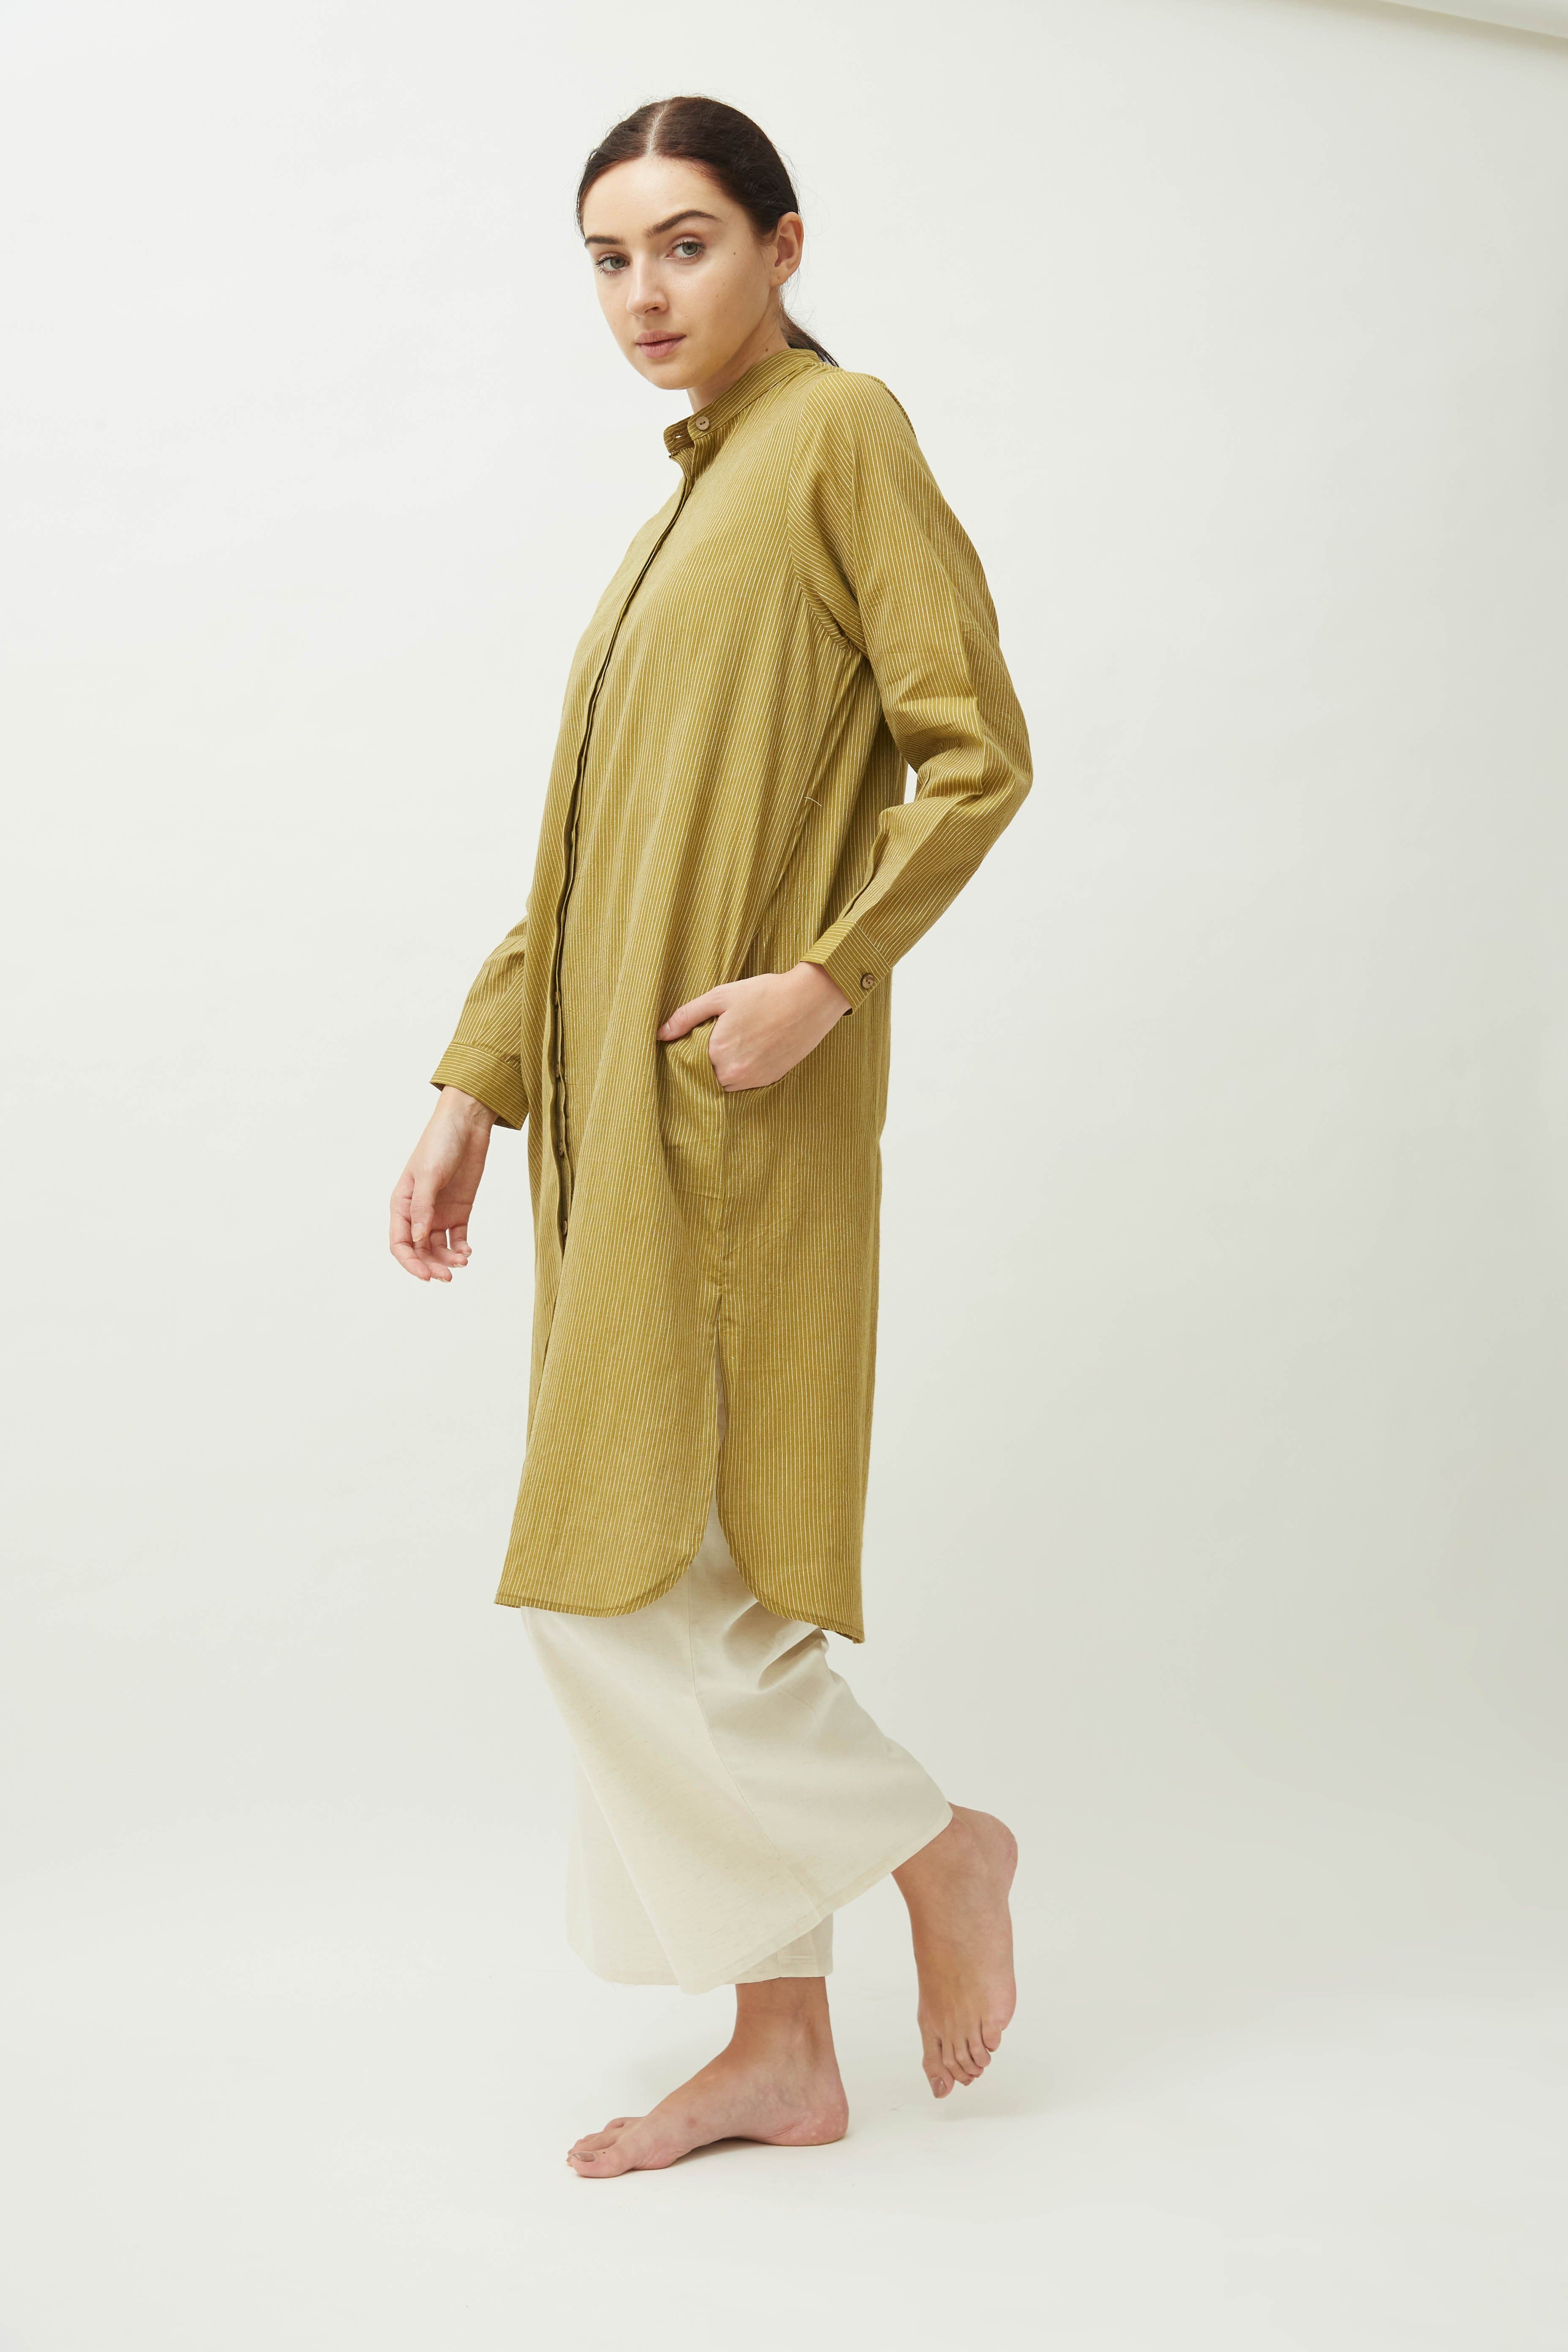 Saltpetre women's long shirt - olive green. With mandarin collared neck, deep side pockets and full sleeves. Made of 100% organic cotton